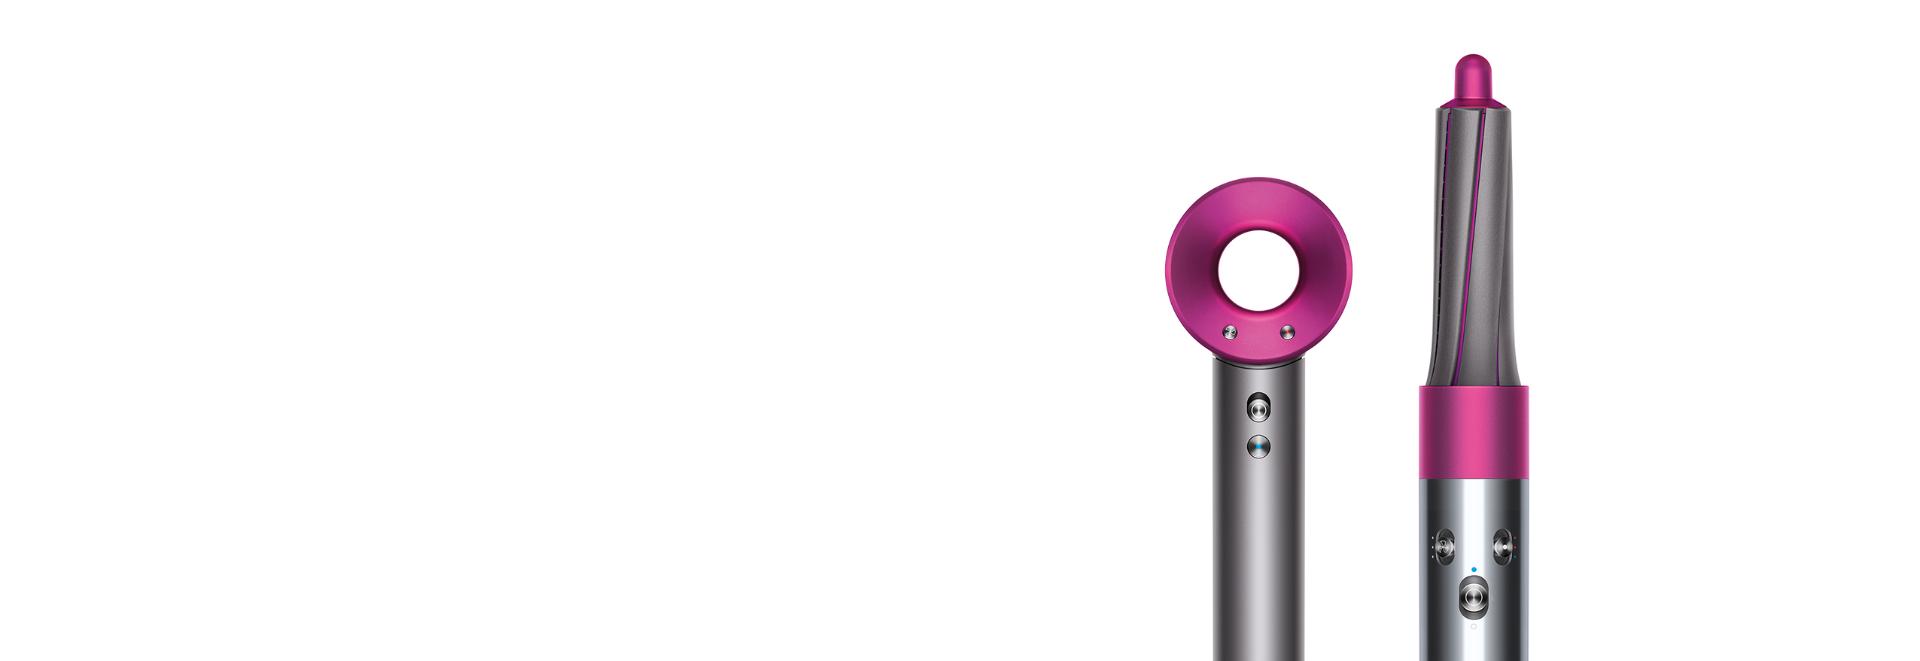 Dyson Supersonic™ hair dryer and Dyson Airwrap™ styler